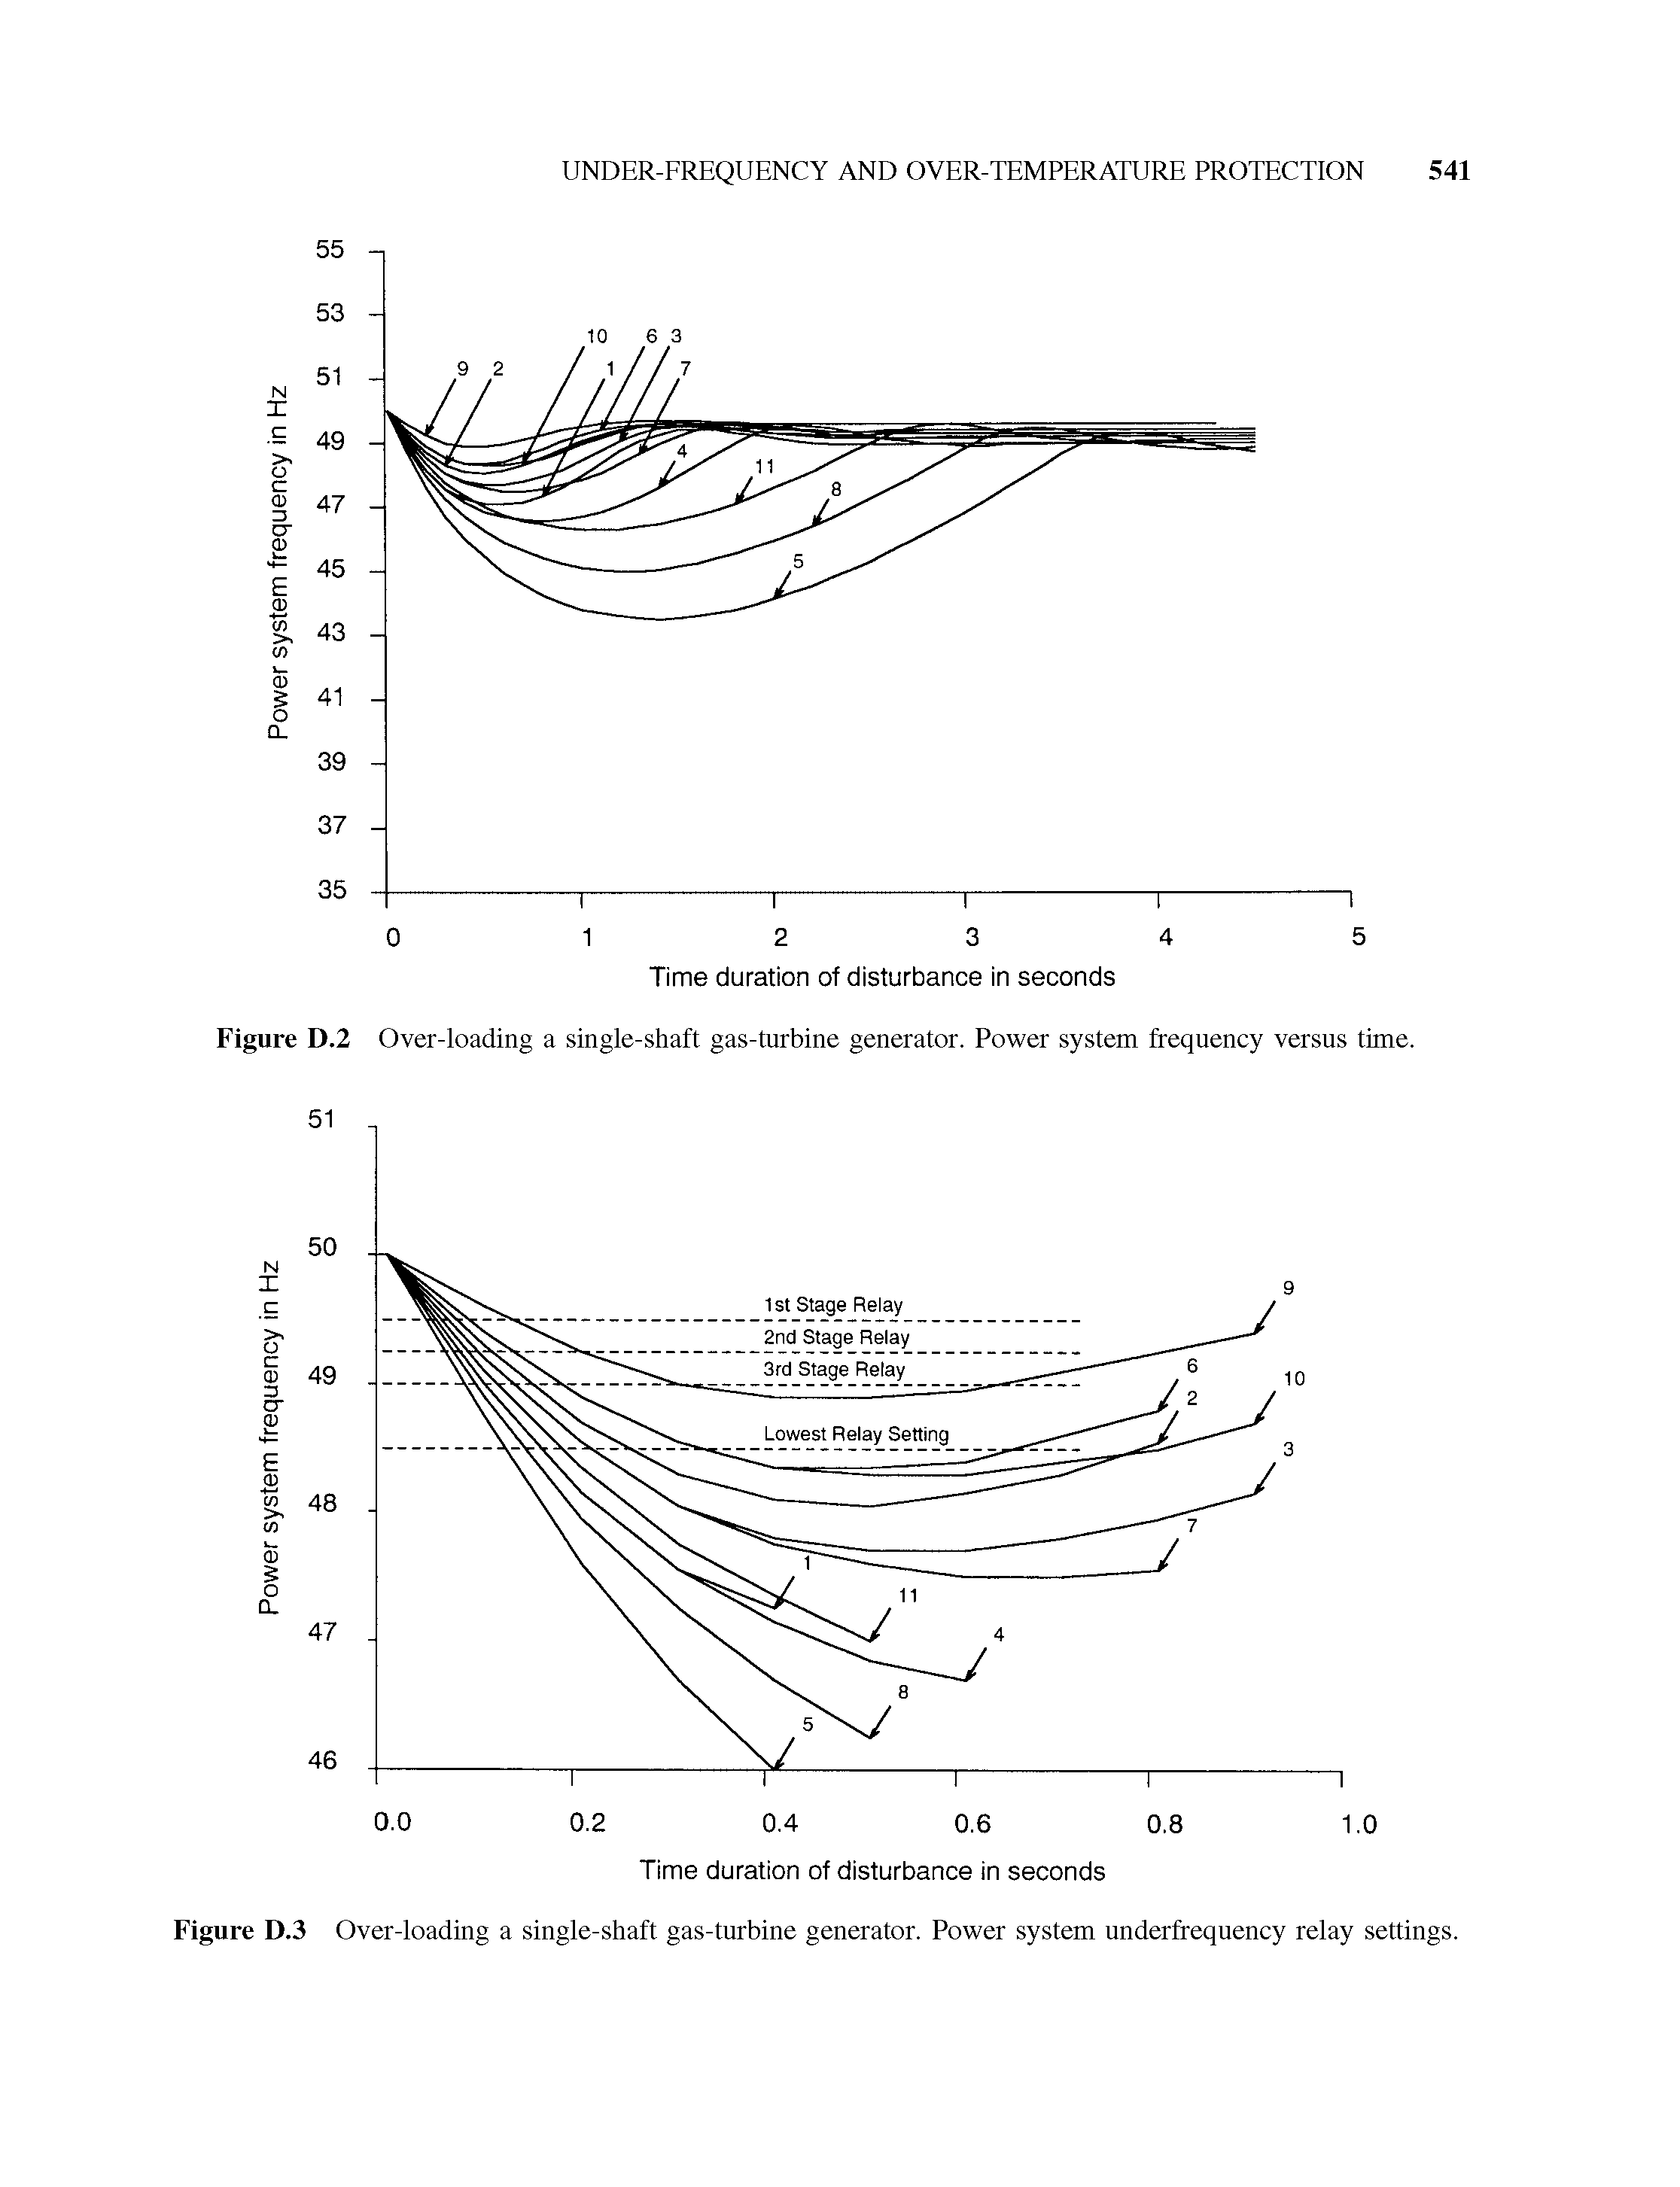 Figure D.2 Over-loading a single-shaft gas-turbine generator. Power system frequency versus time.